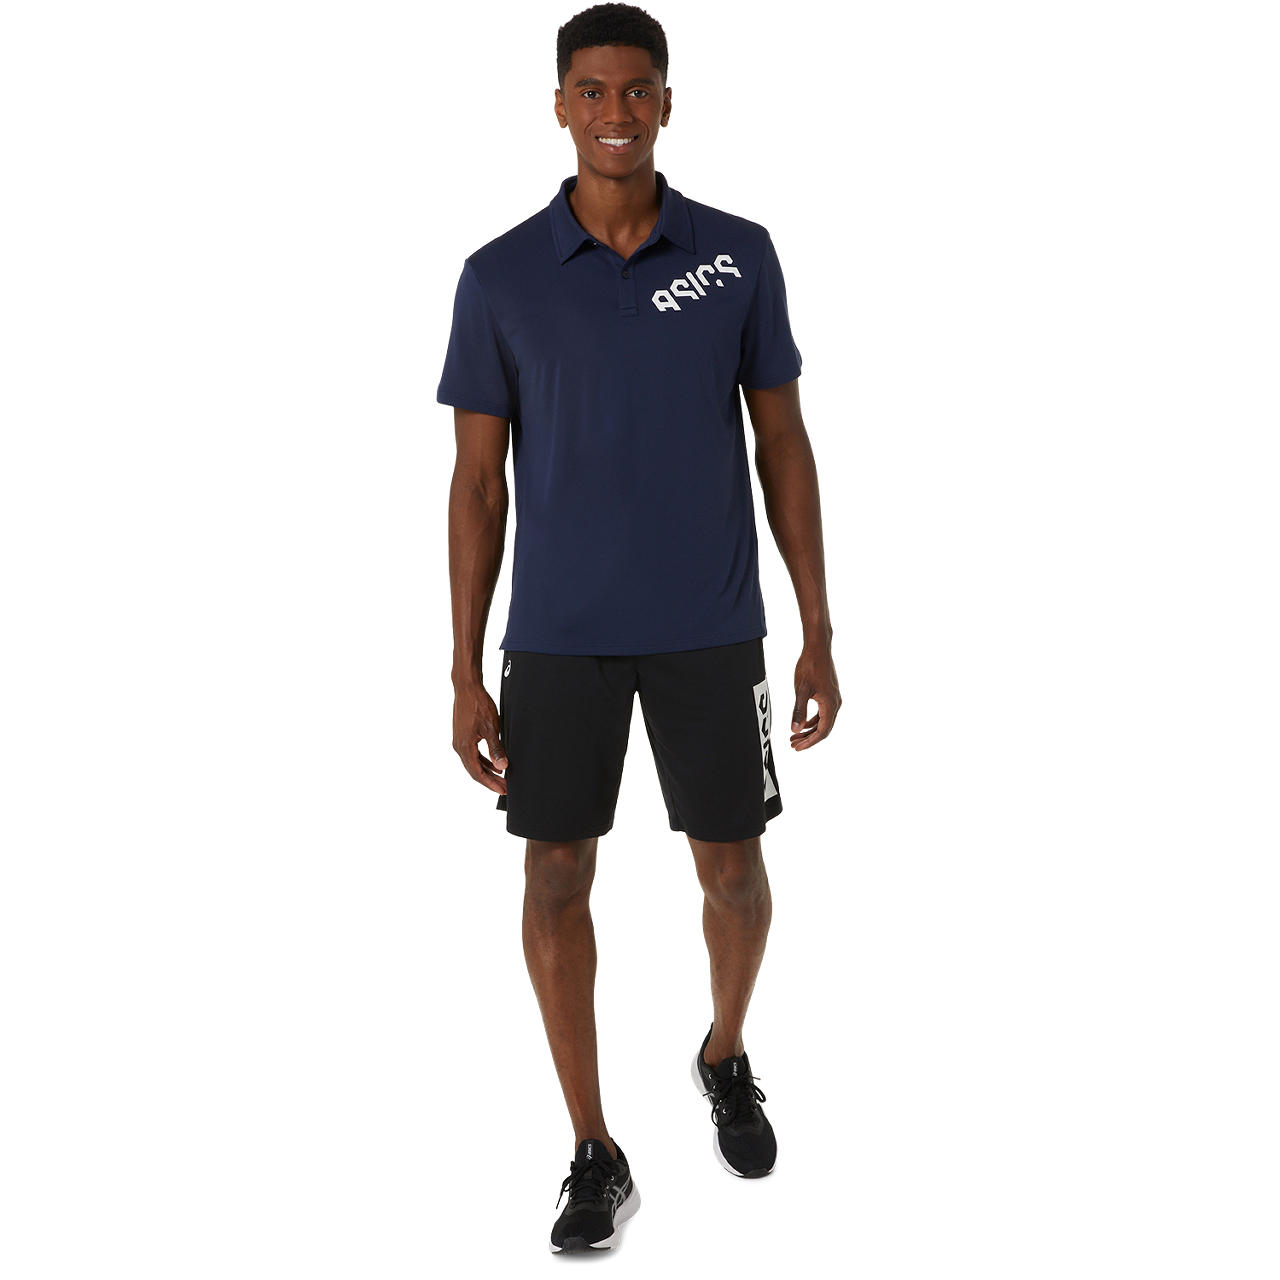 ASICS HEX GRAPHIC DRY POLO SHIRT, MIDNIGHT/BRILLIANT WHITE, swatch